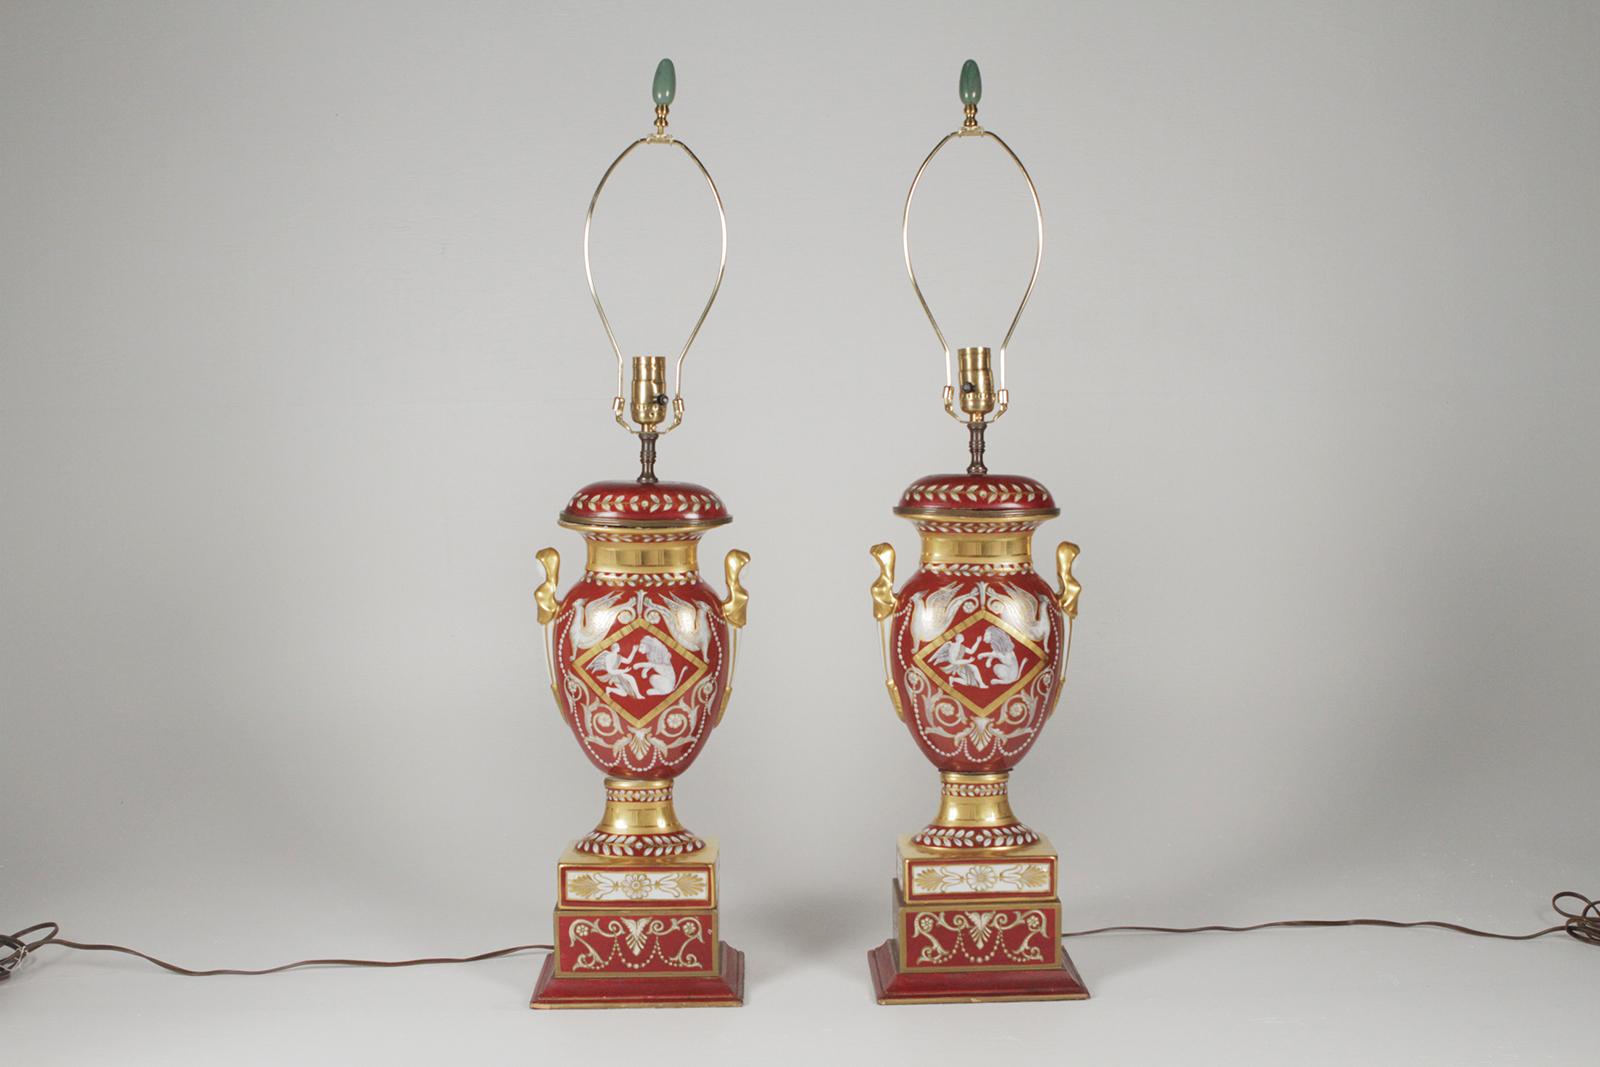 Pair of Gilt And Painted Porcelain Table Lamps Circa Early 1900’s With Mythological Decorations. Vibrant iron red background with sumptuous gilding all over. The shades are for Photographic purposes only and NOT included with these lamps.m